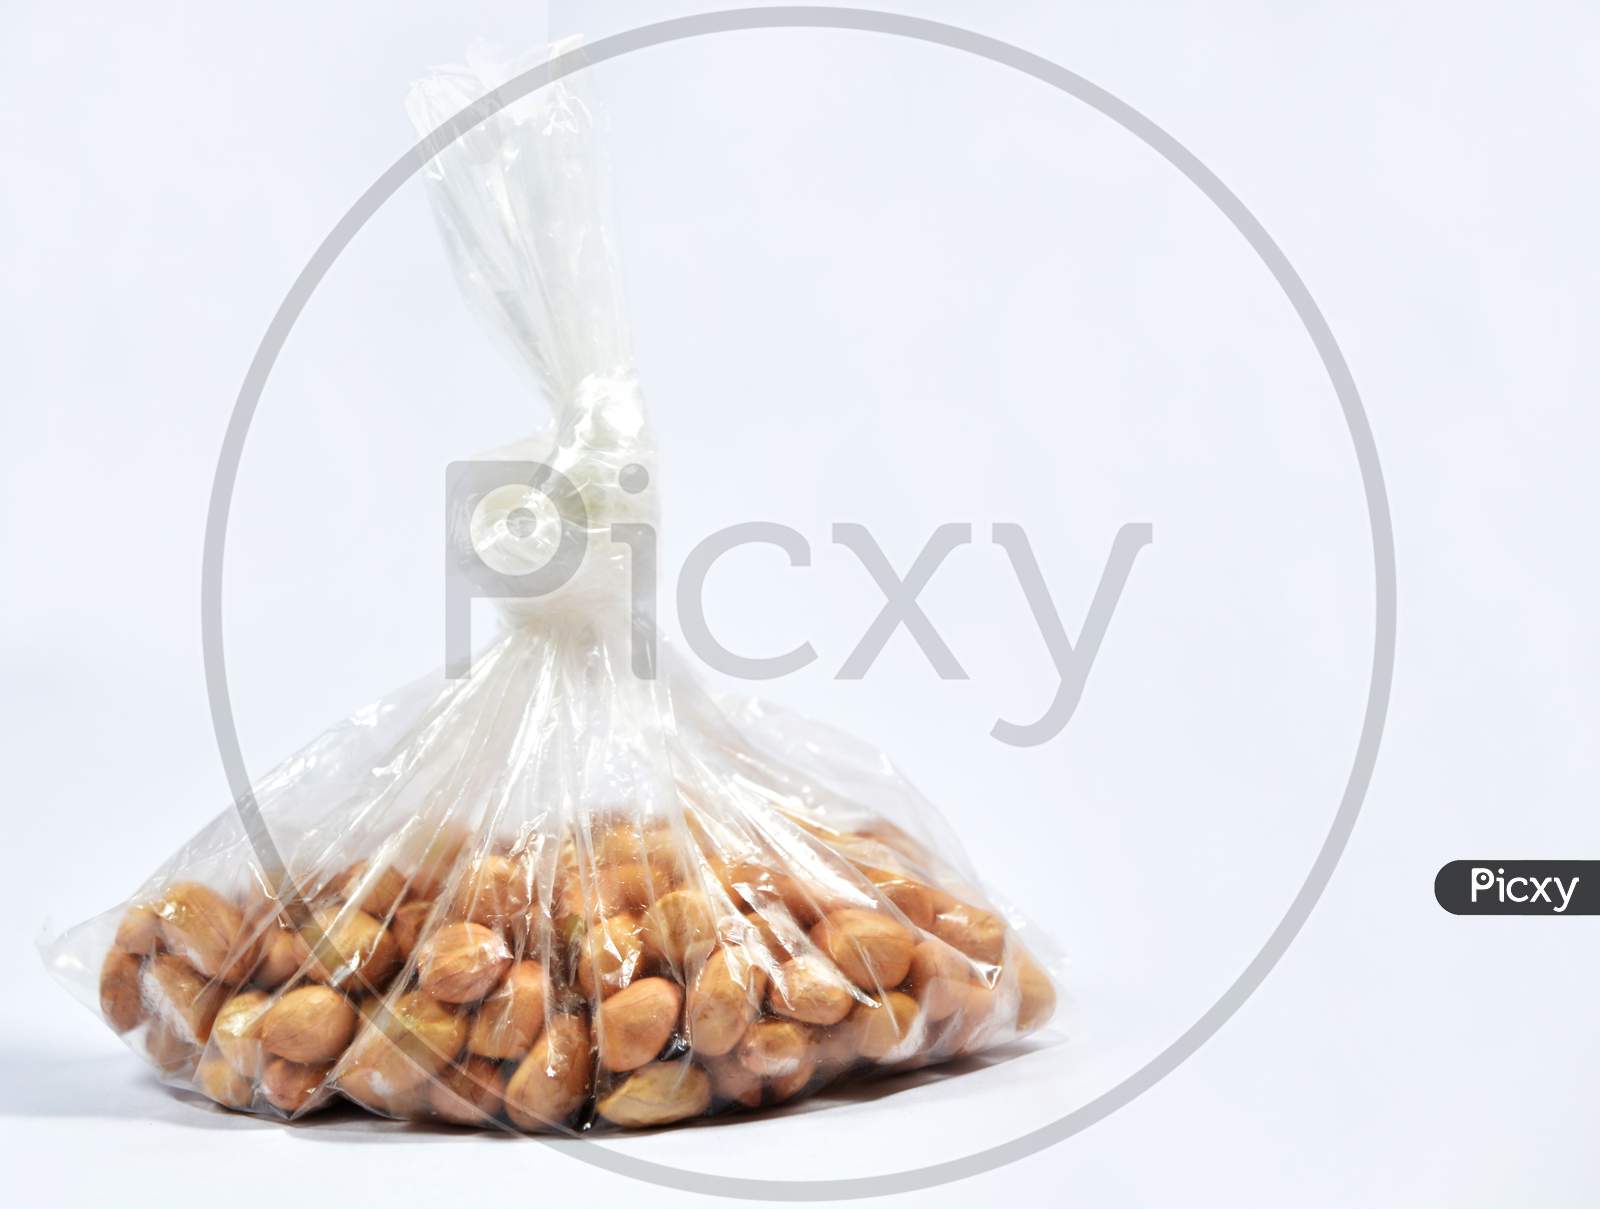 Raw Arachis Hypogaea,Peanut Or Groundnuts In A Bag On Isolated White Background.